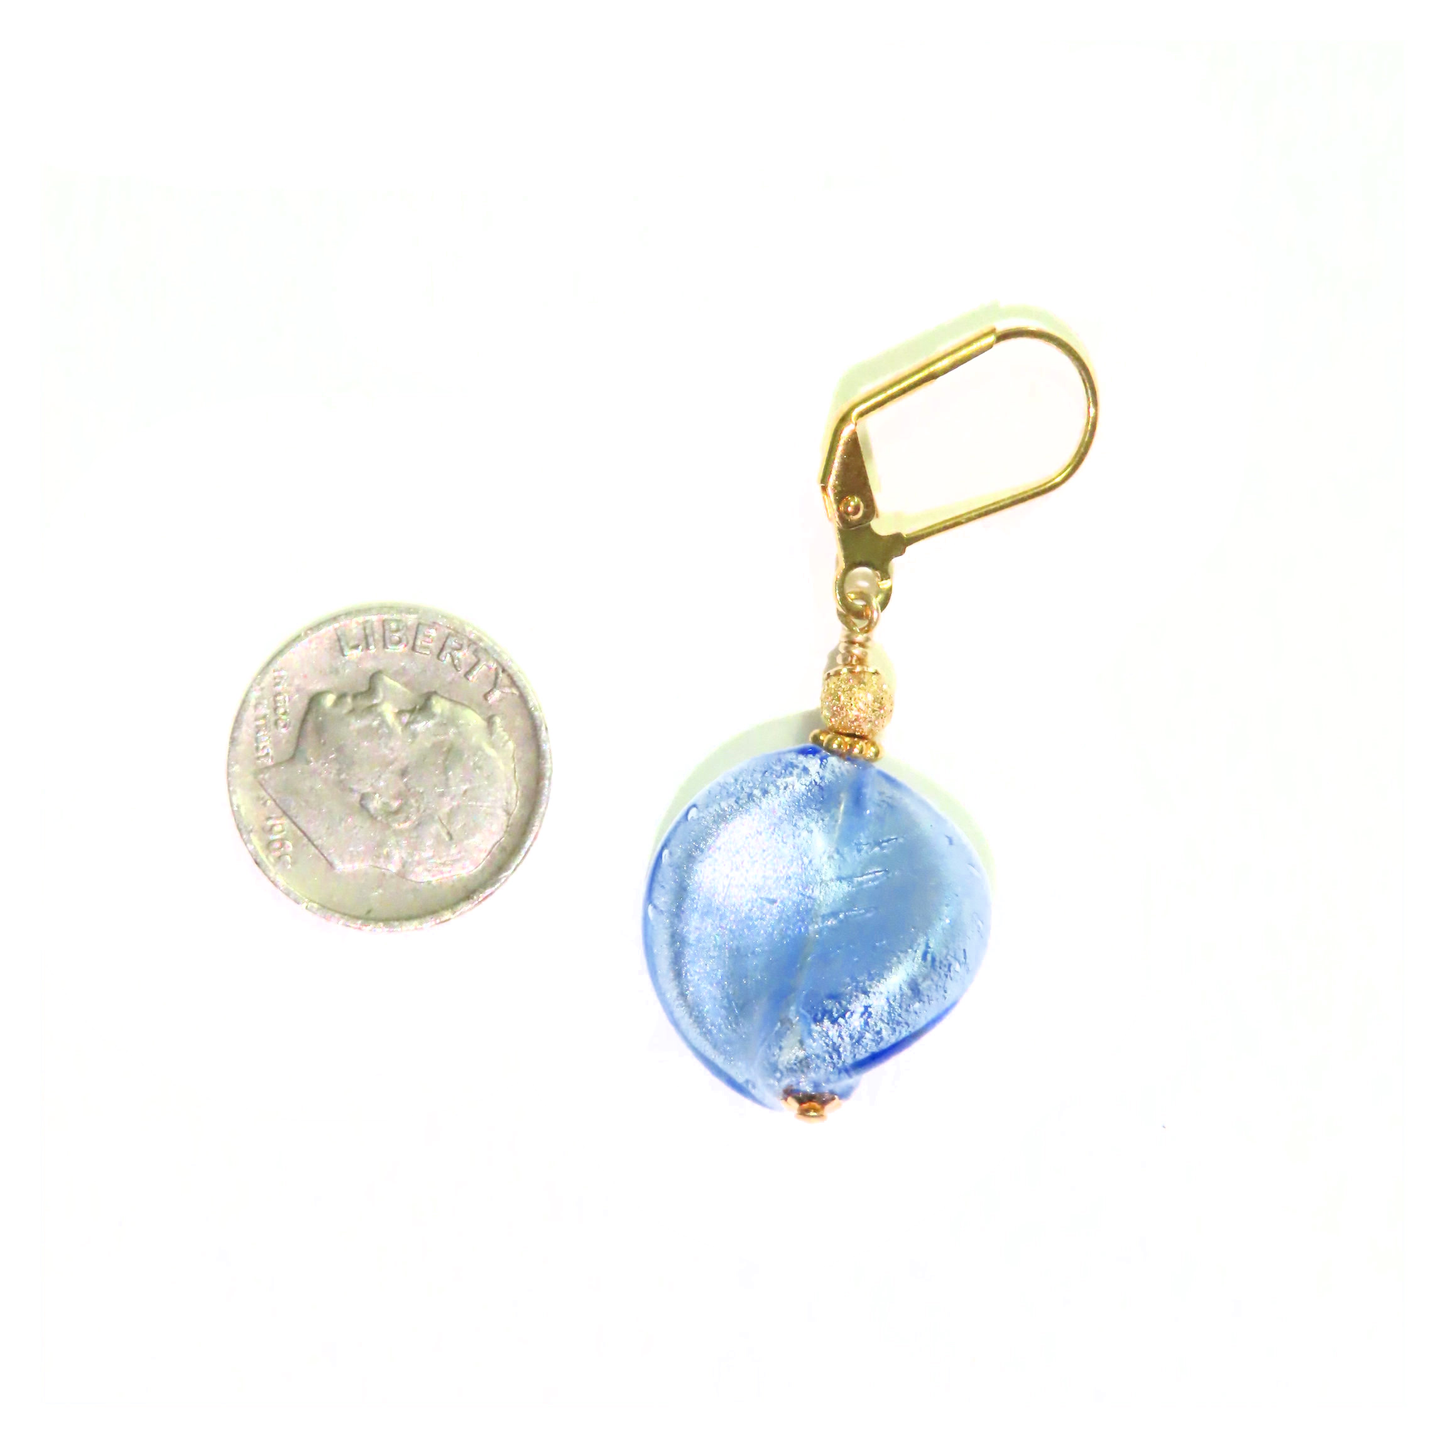 a coin is next to a blue glass bead